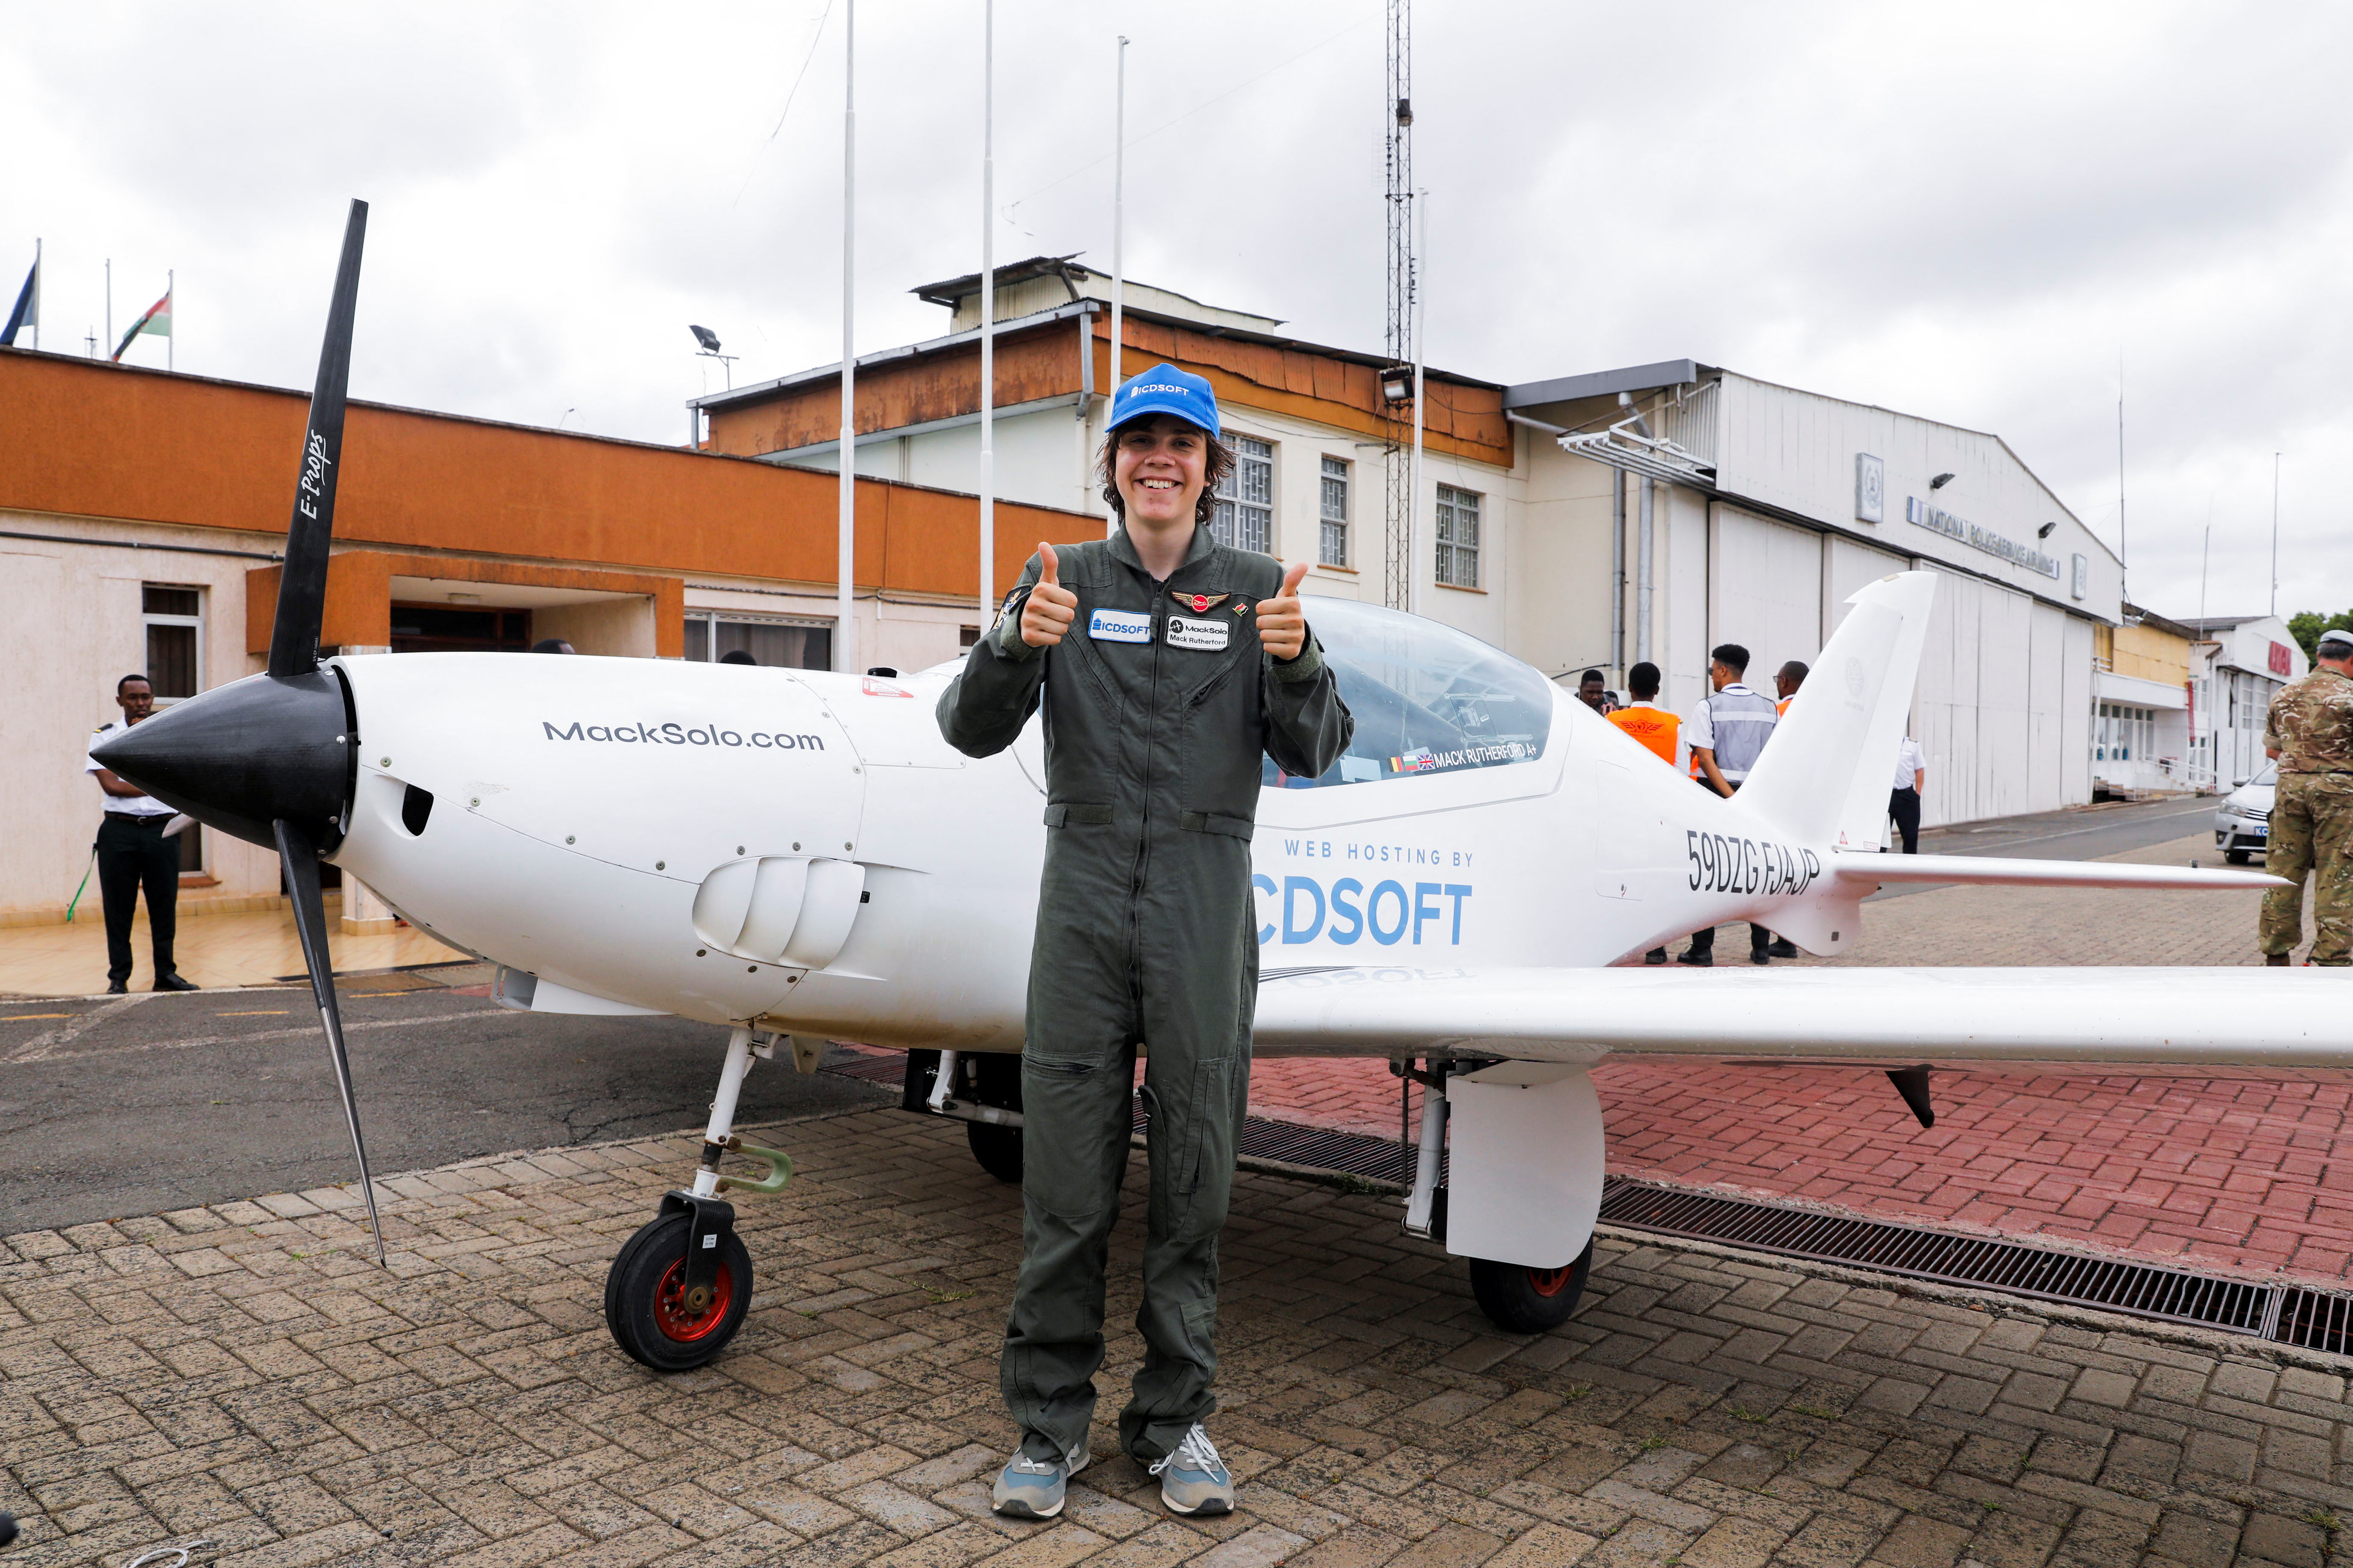 pMack Rutherford, a 16-year-old British-Belgian pilot, poses for a photo after arriving at the Wilson airport in Nairobi